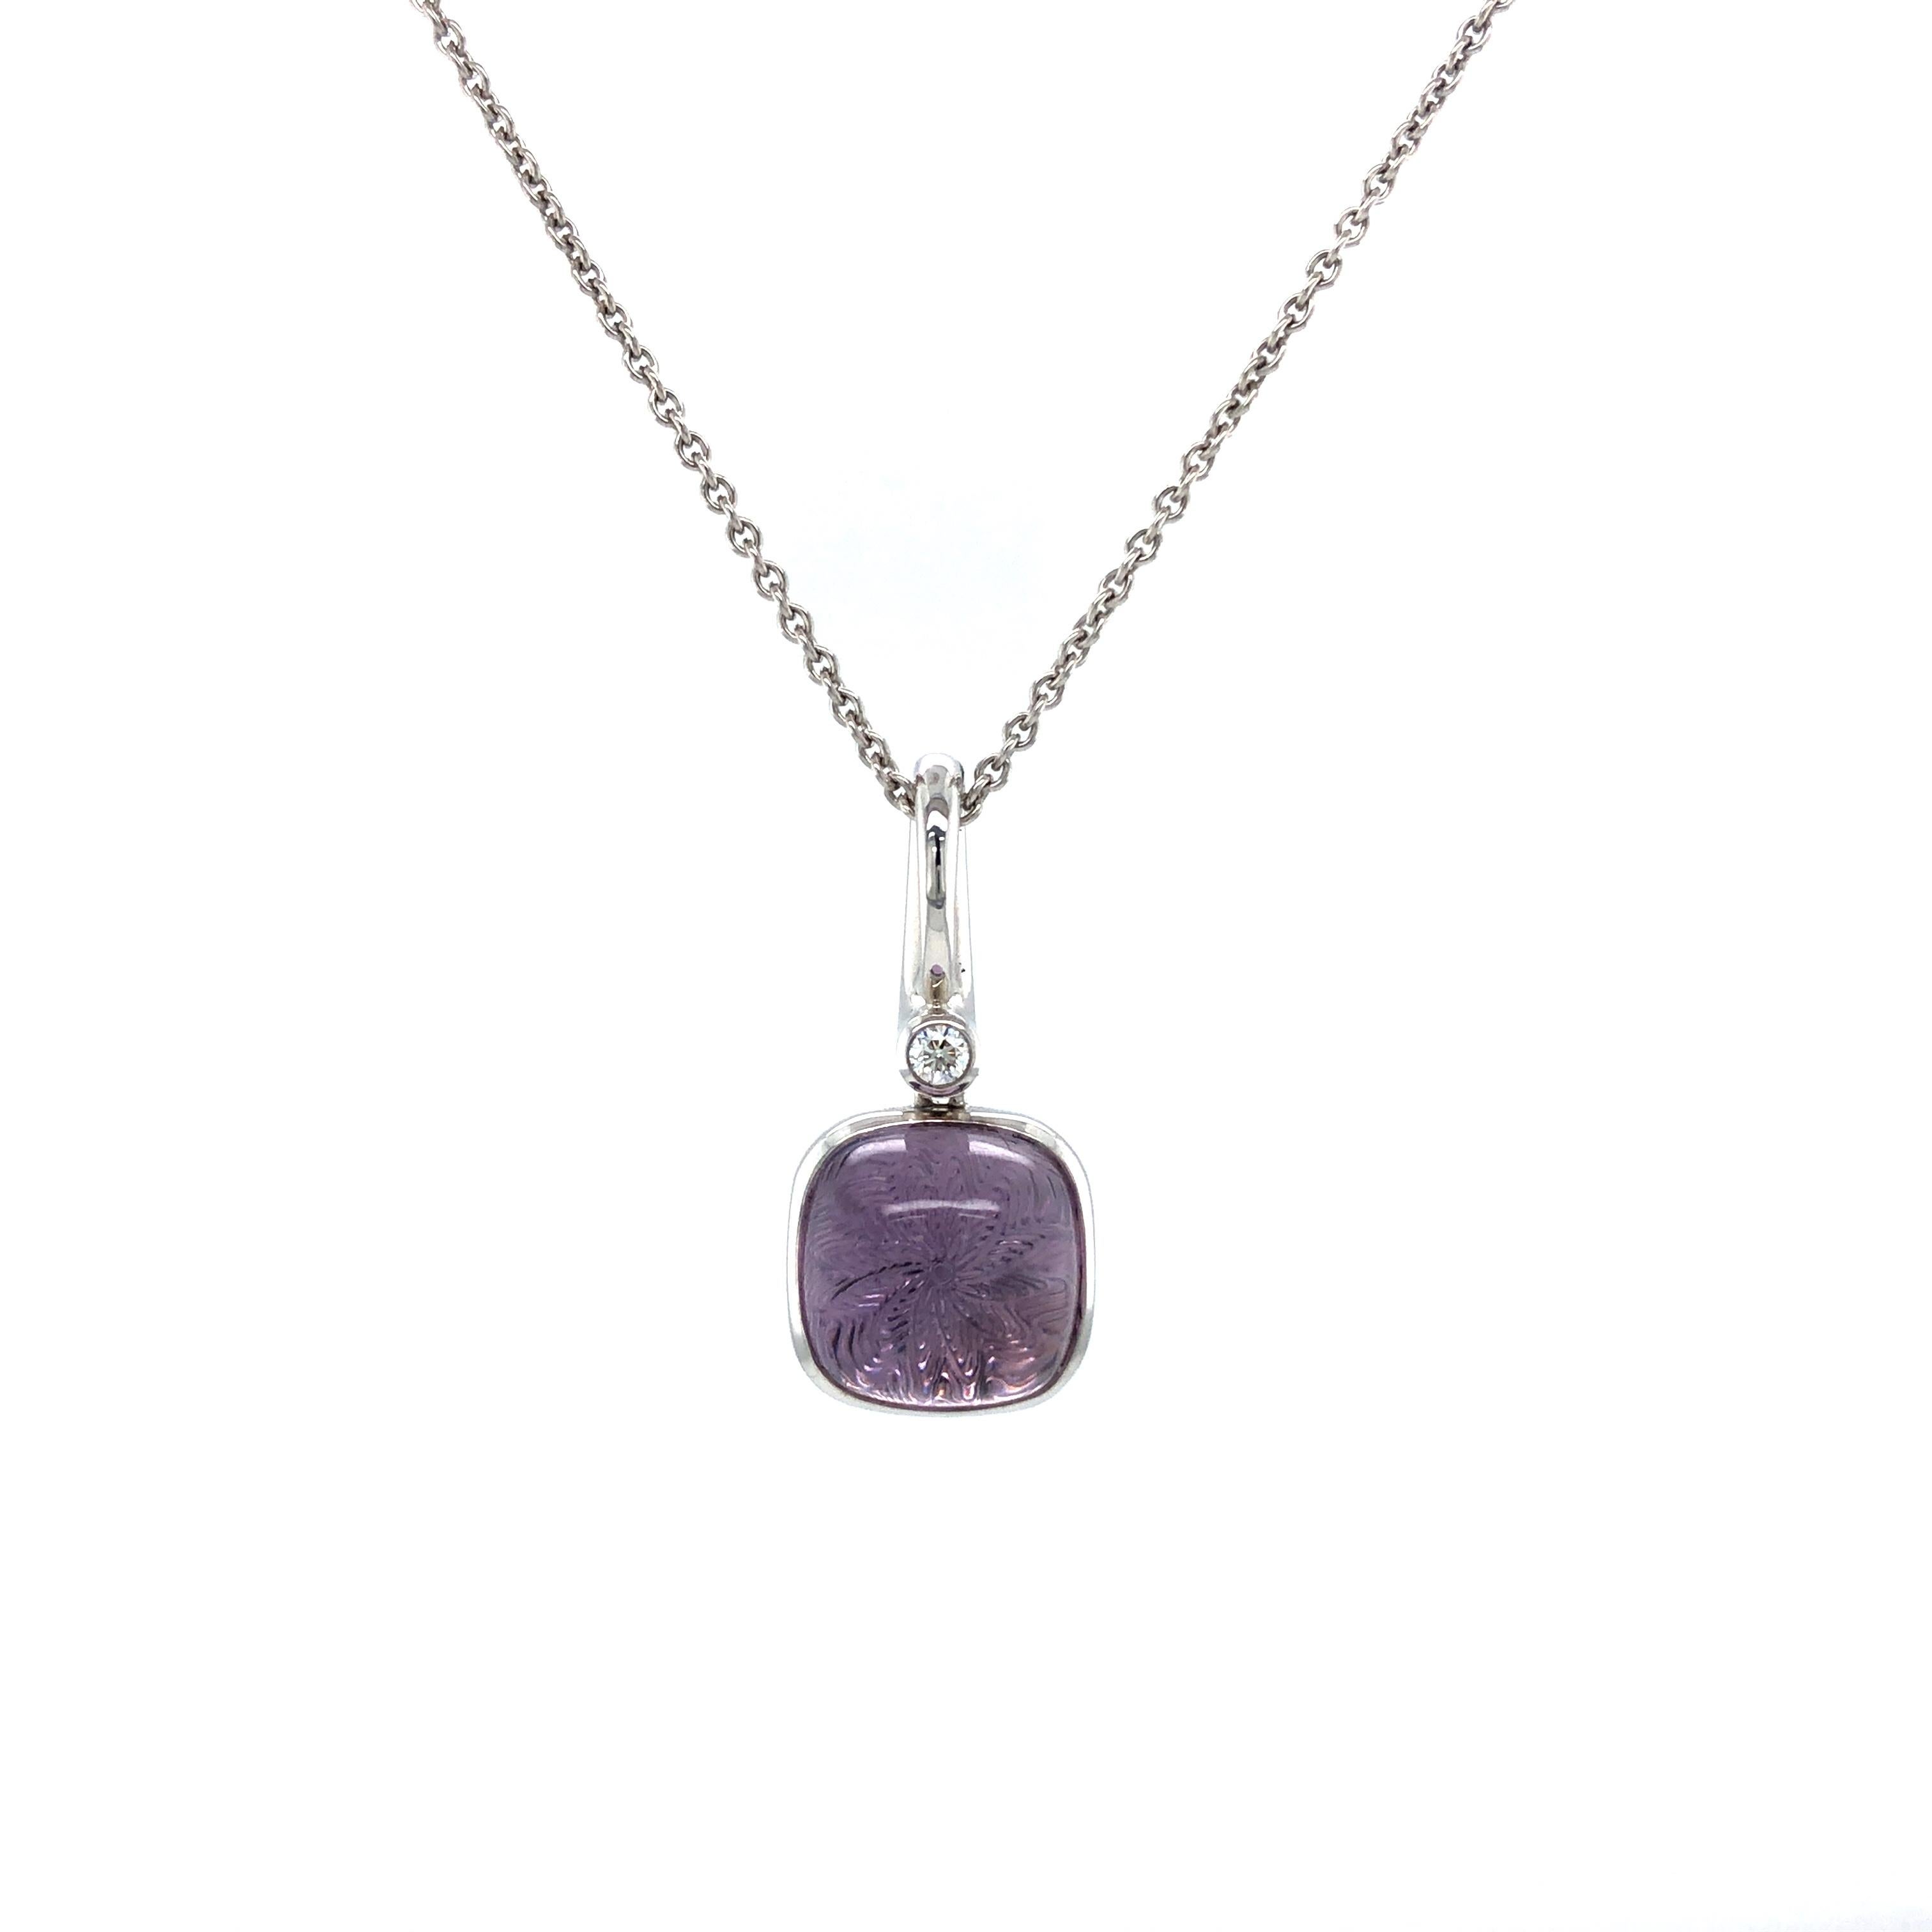 Victor Mayer square shaped pendant necklace 18k white gold, Era Collection, 1 diamond 0.04 ct, G VS, 1 amethyst cabochon with guilloche

About the creator Victor Mayer
Victor Mayer is internationally renowned for elegant timeless designs and